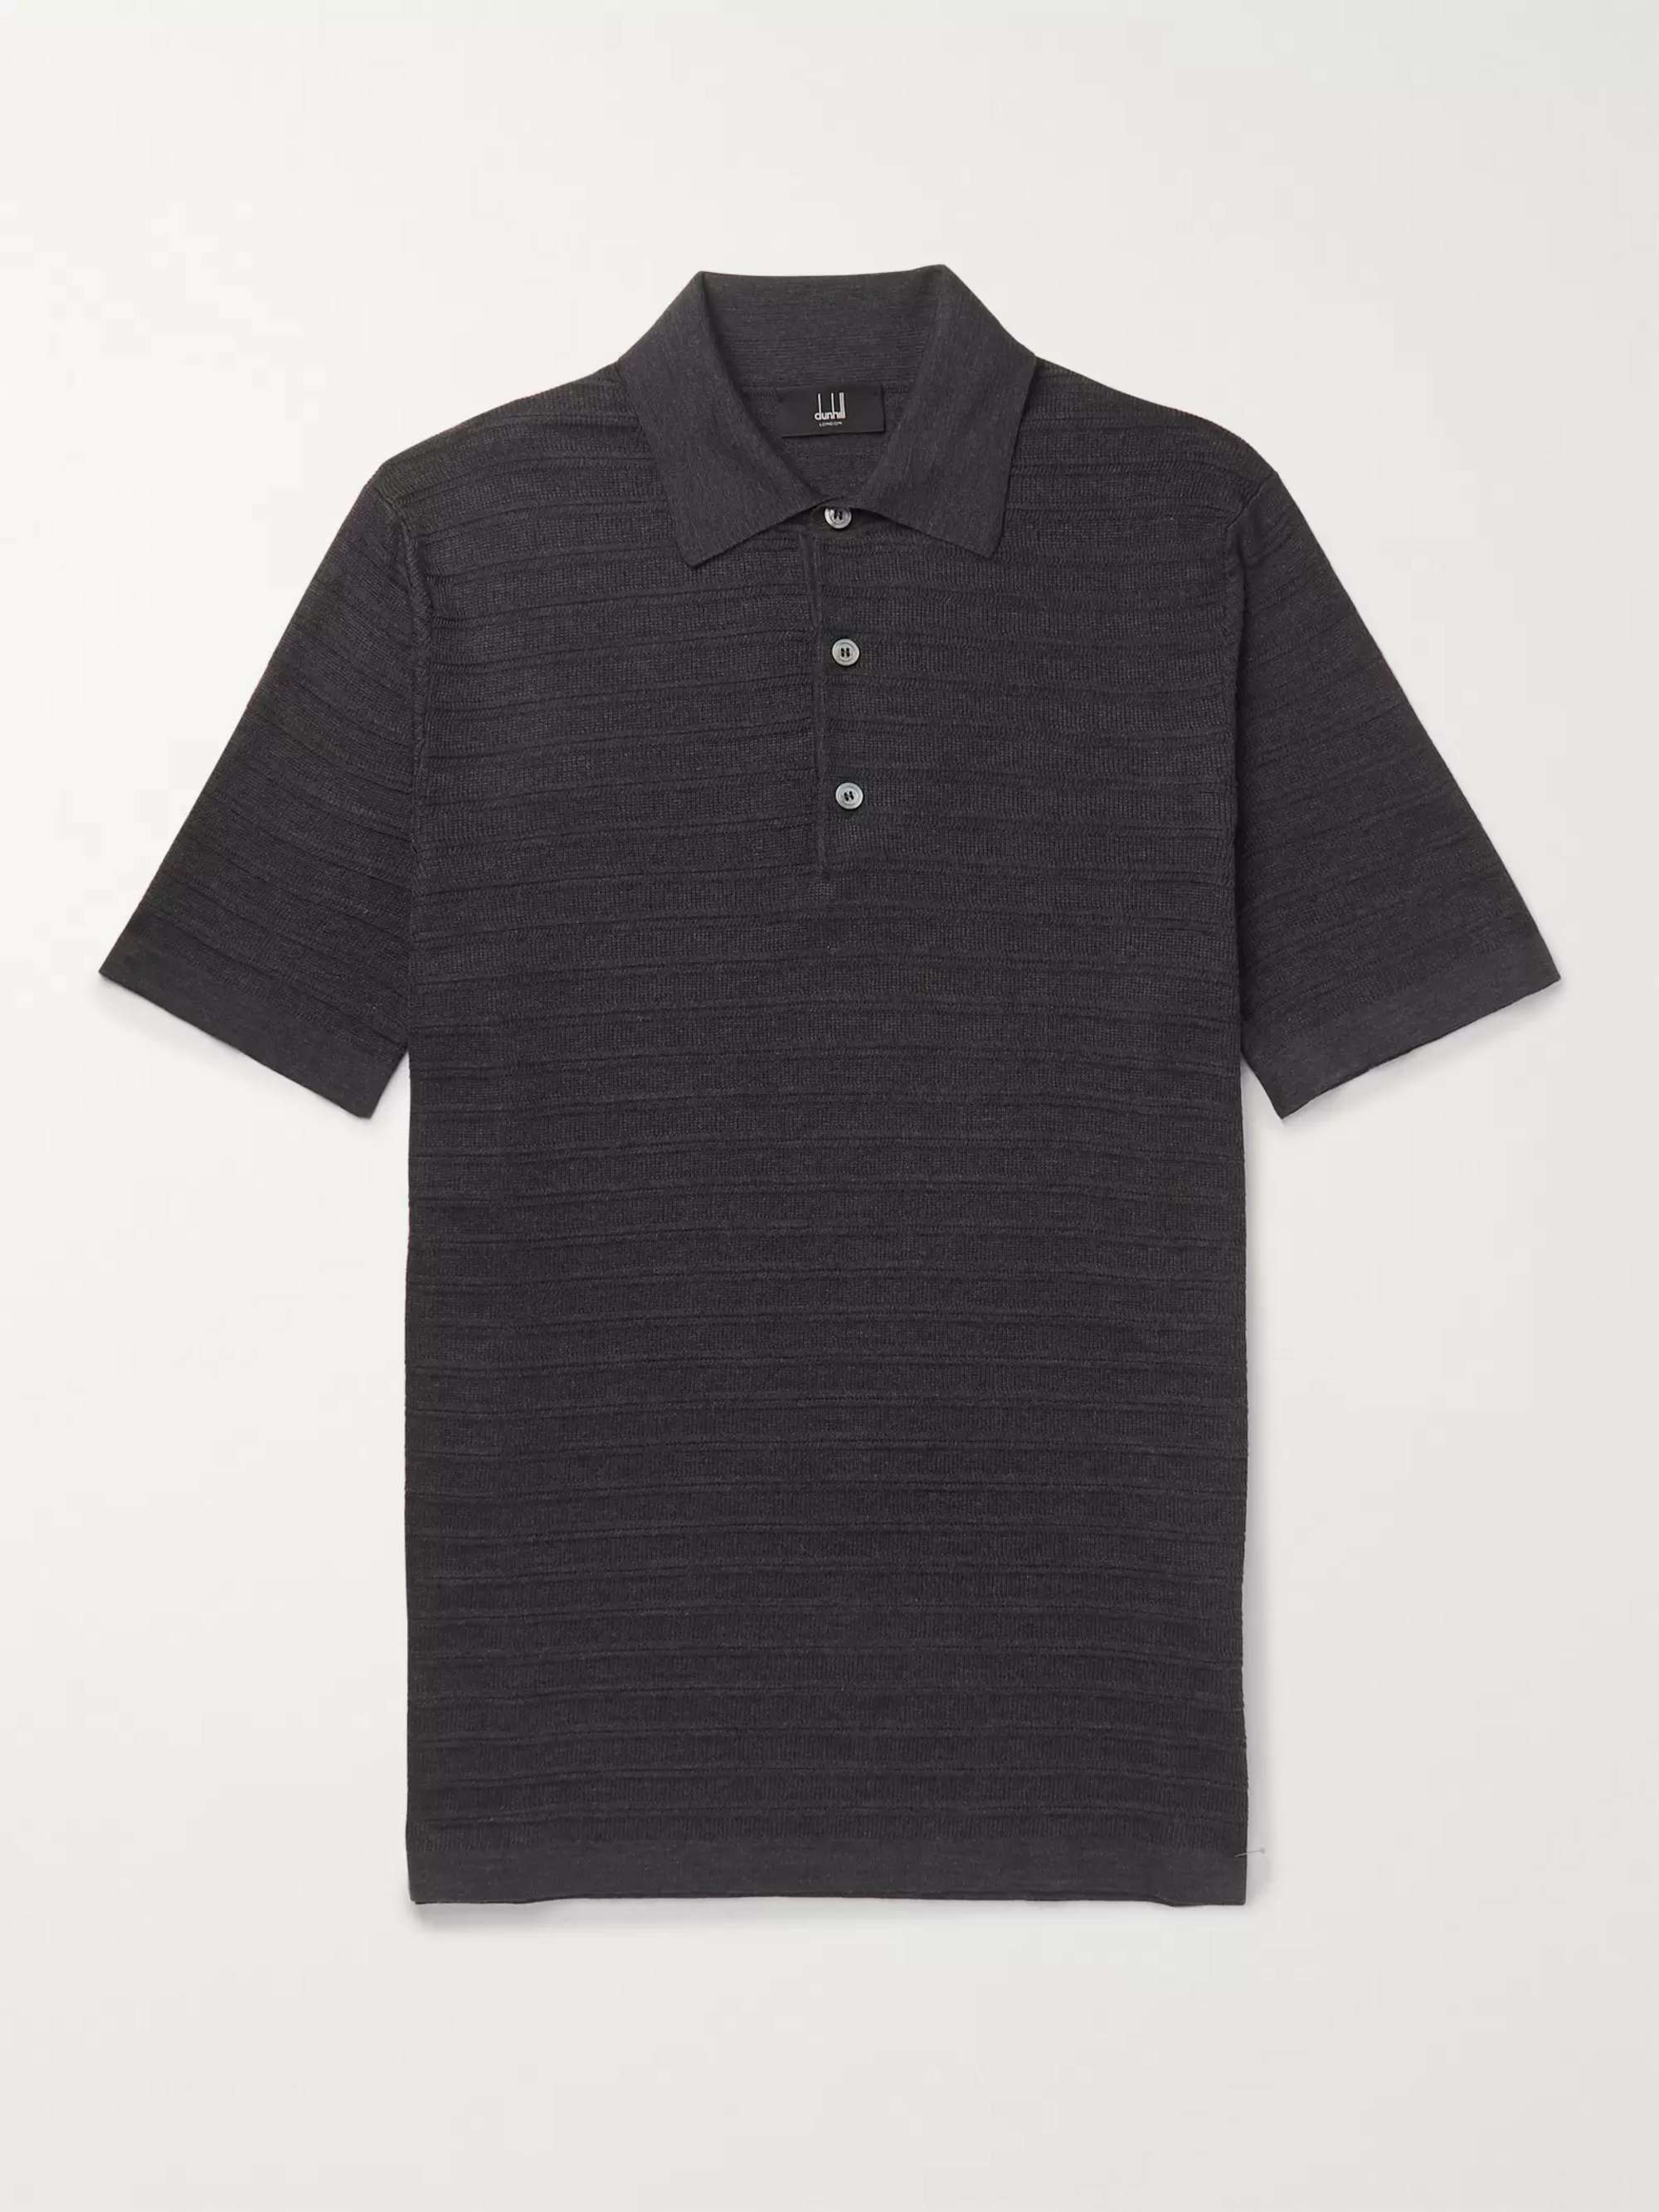 DUNHILL Slim-Fit Striped Knitted Mulberry Silk Polo Shirt